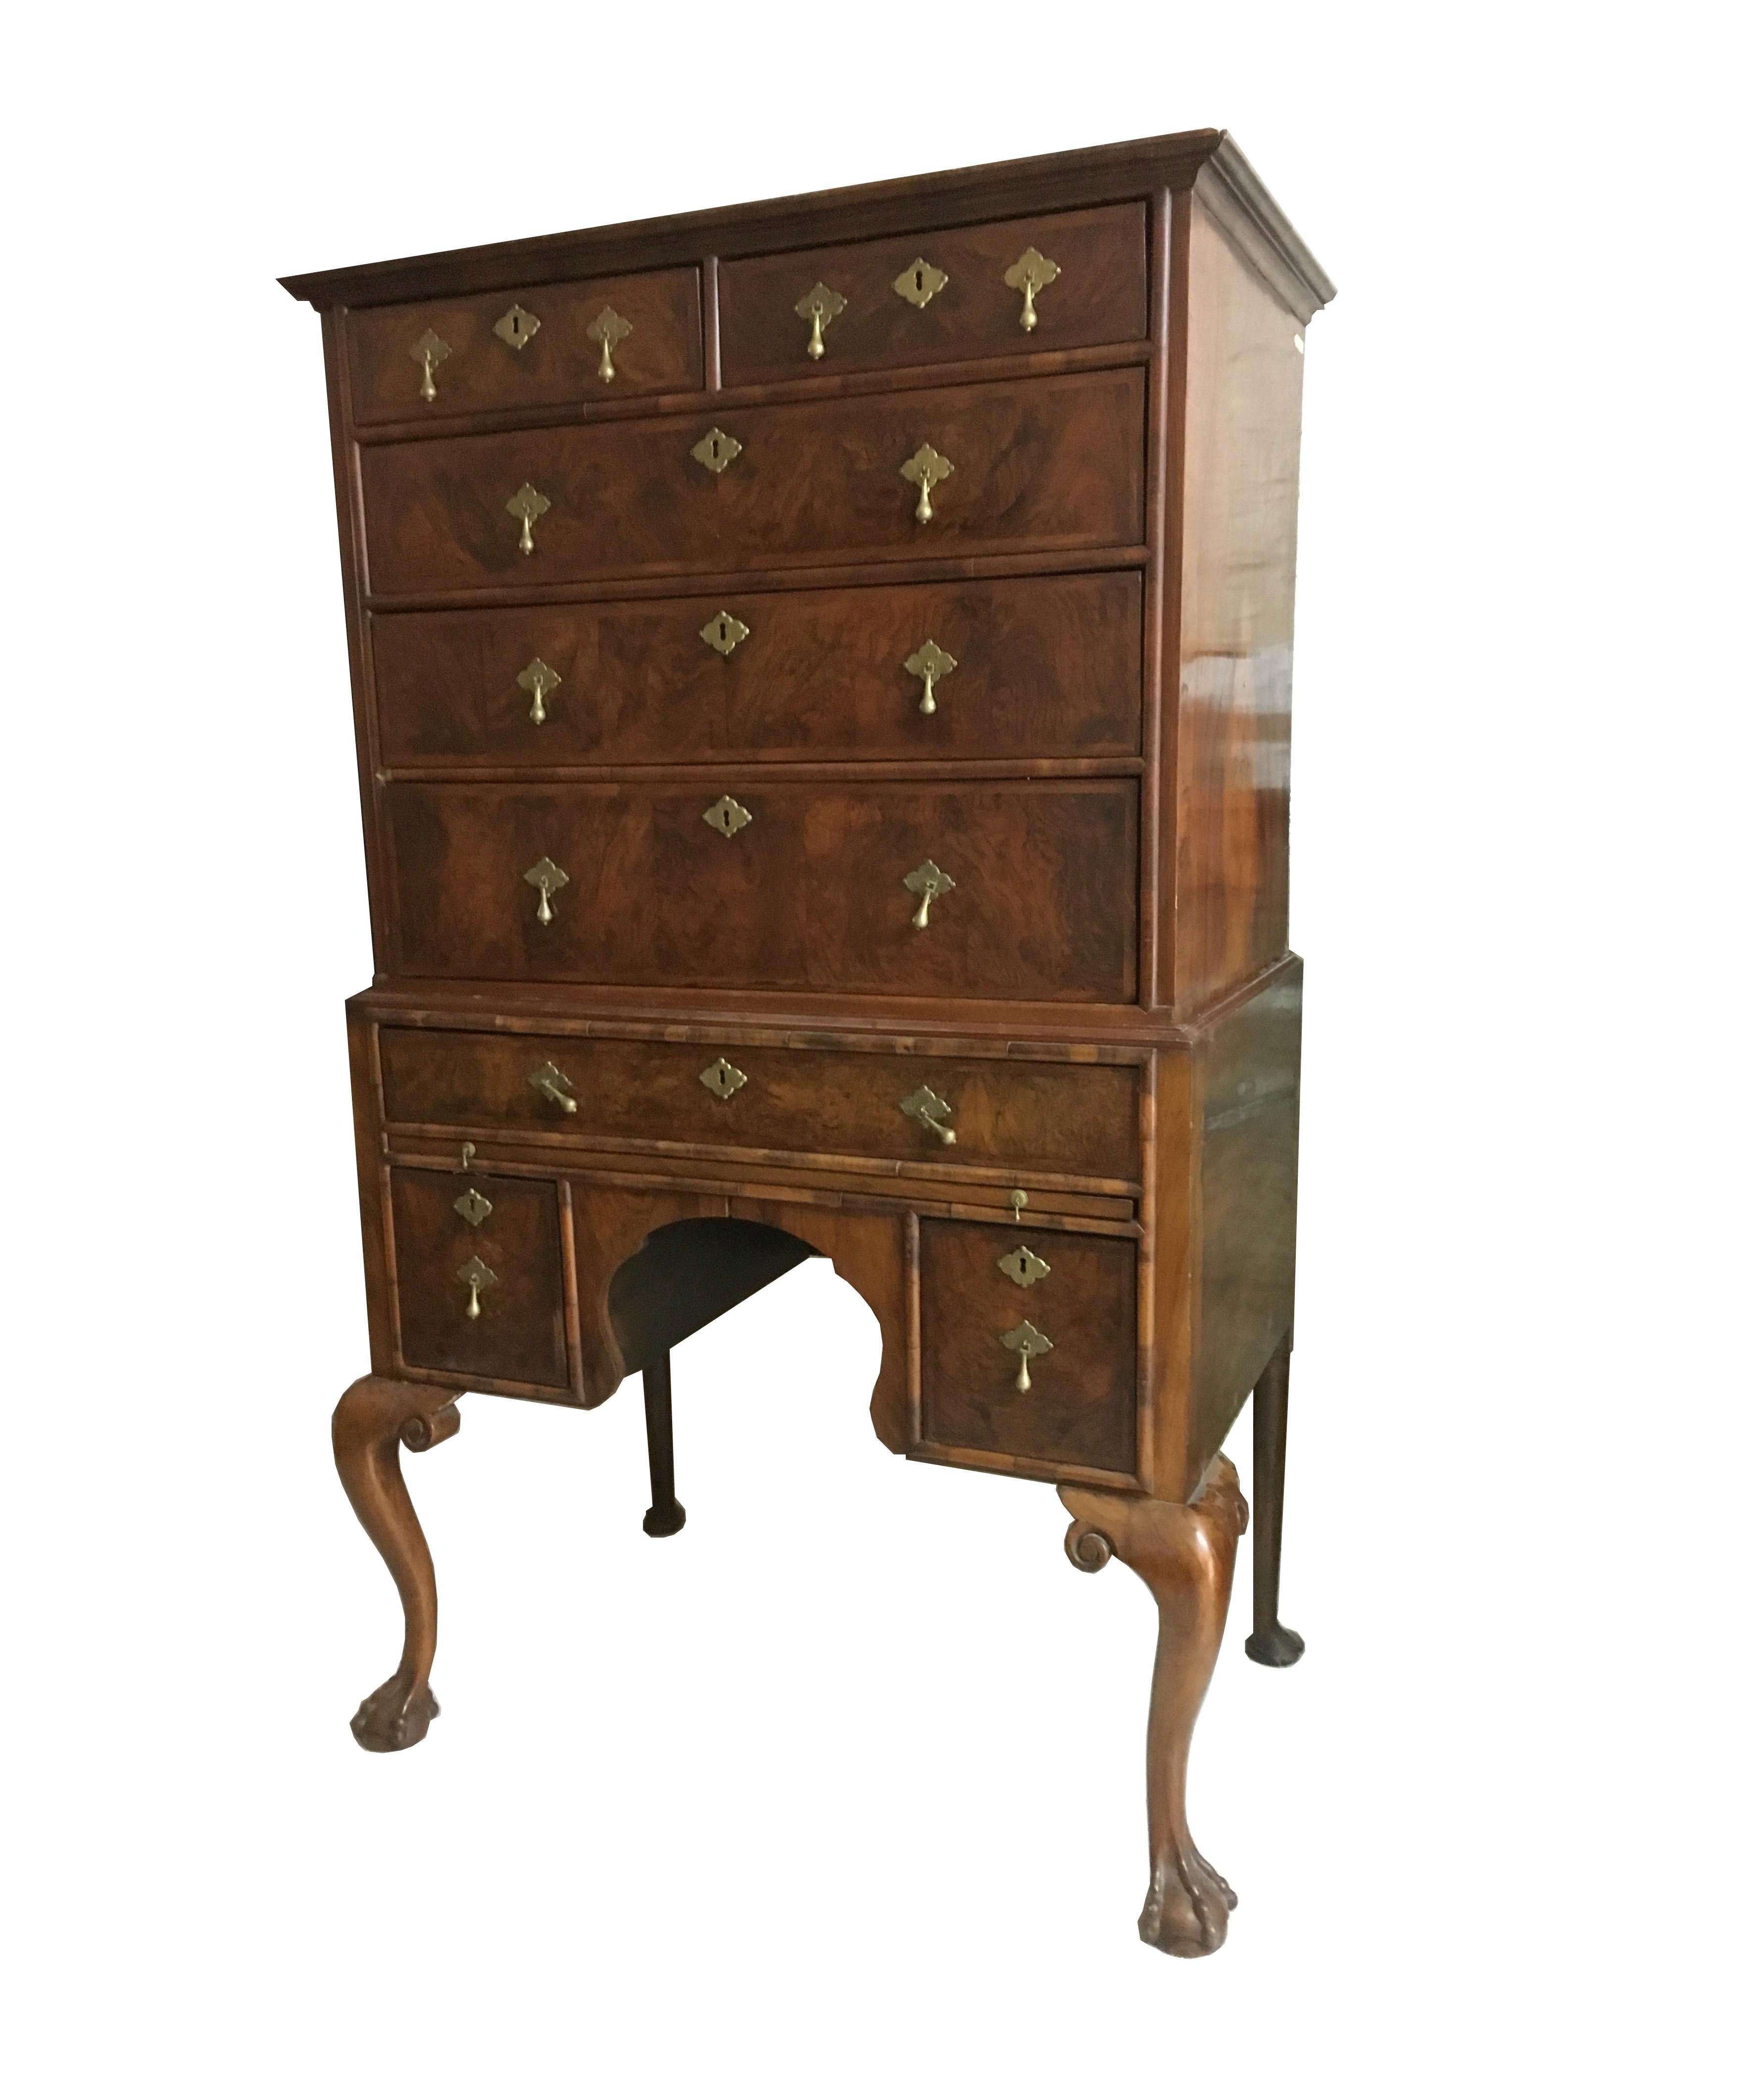 Chest of drawers in walnut wood and walnut root with extractable desk.
England, 18th century.